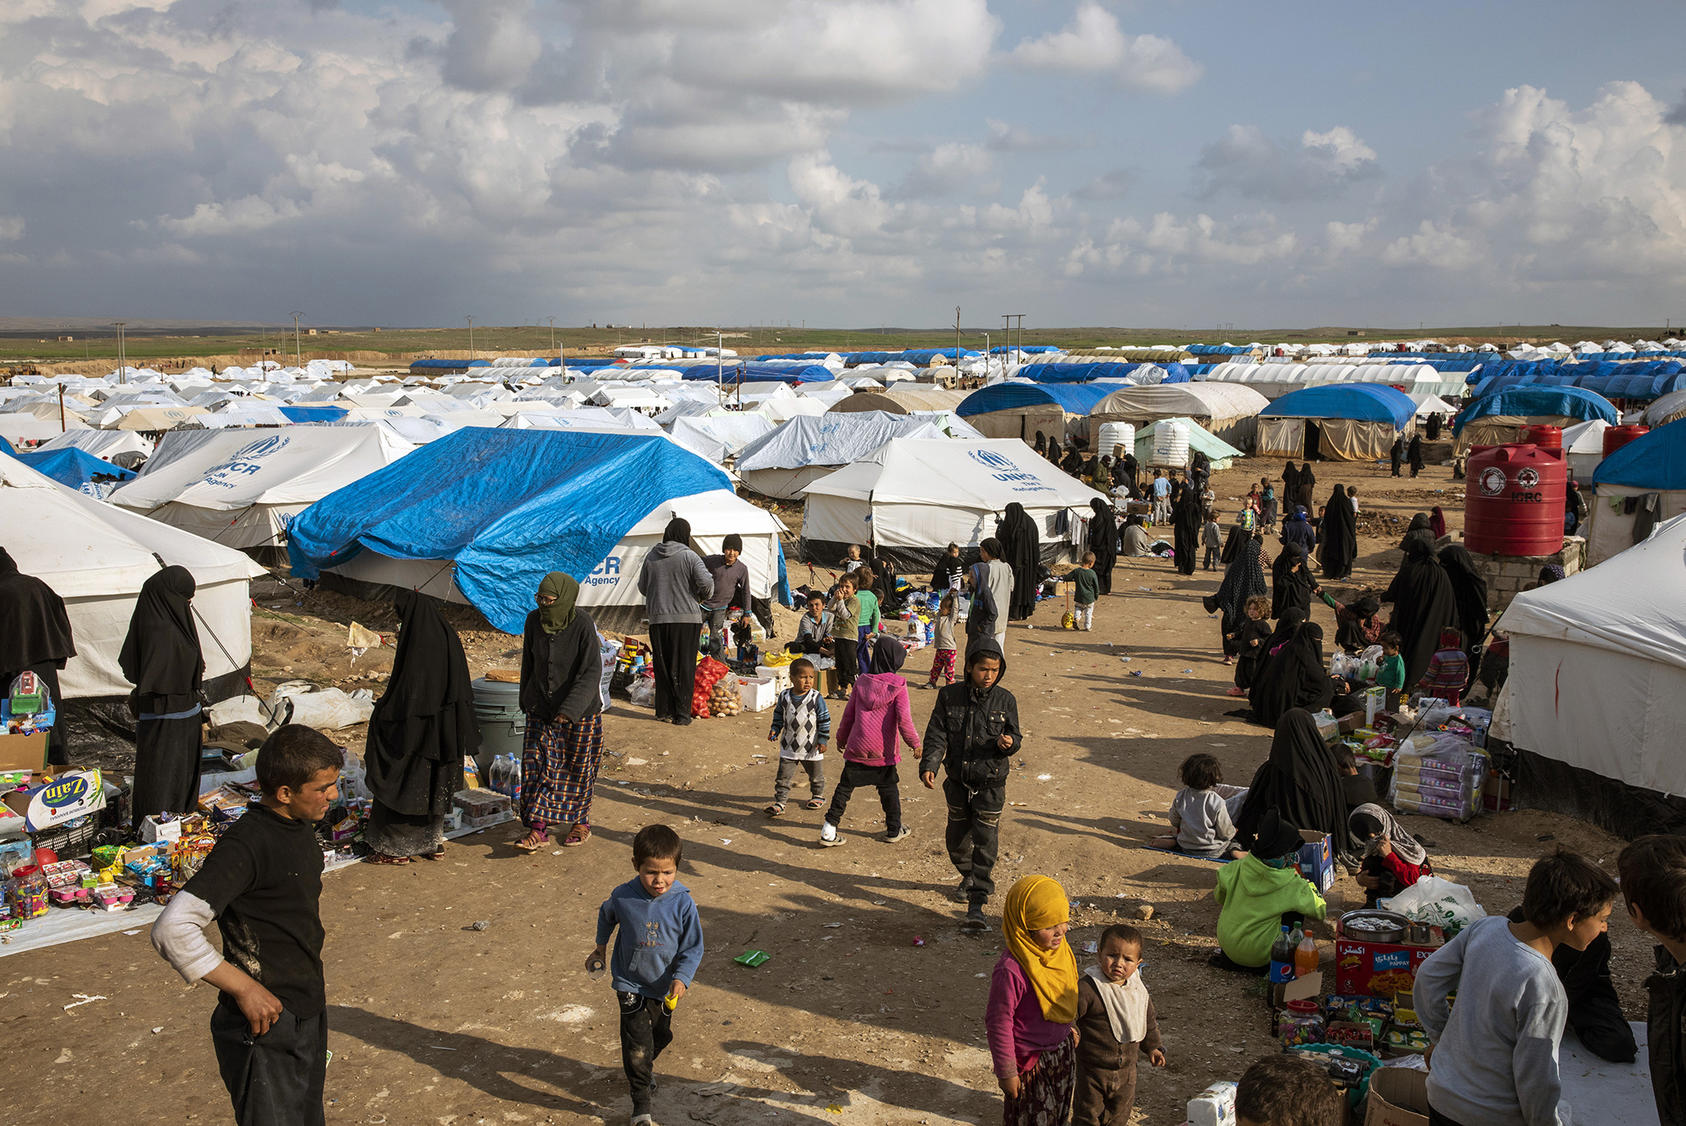 Syria’s Al Hol camp holds thousands of people who lived under ISIS’ rule. Many, including children and people lured or coerced into ISIS’ orbit, are trying to return to homelands abroad. (Ivor Pickett/The New York Times)